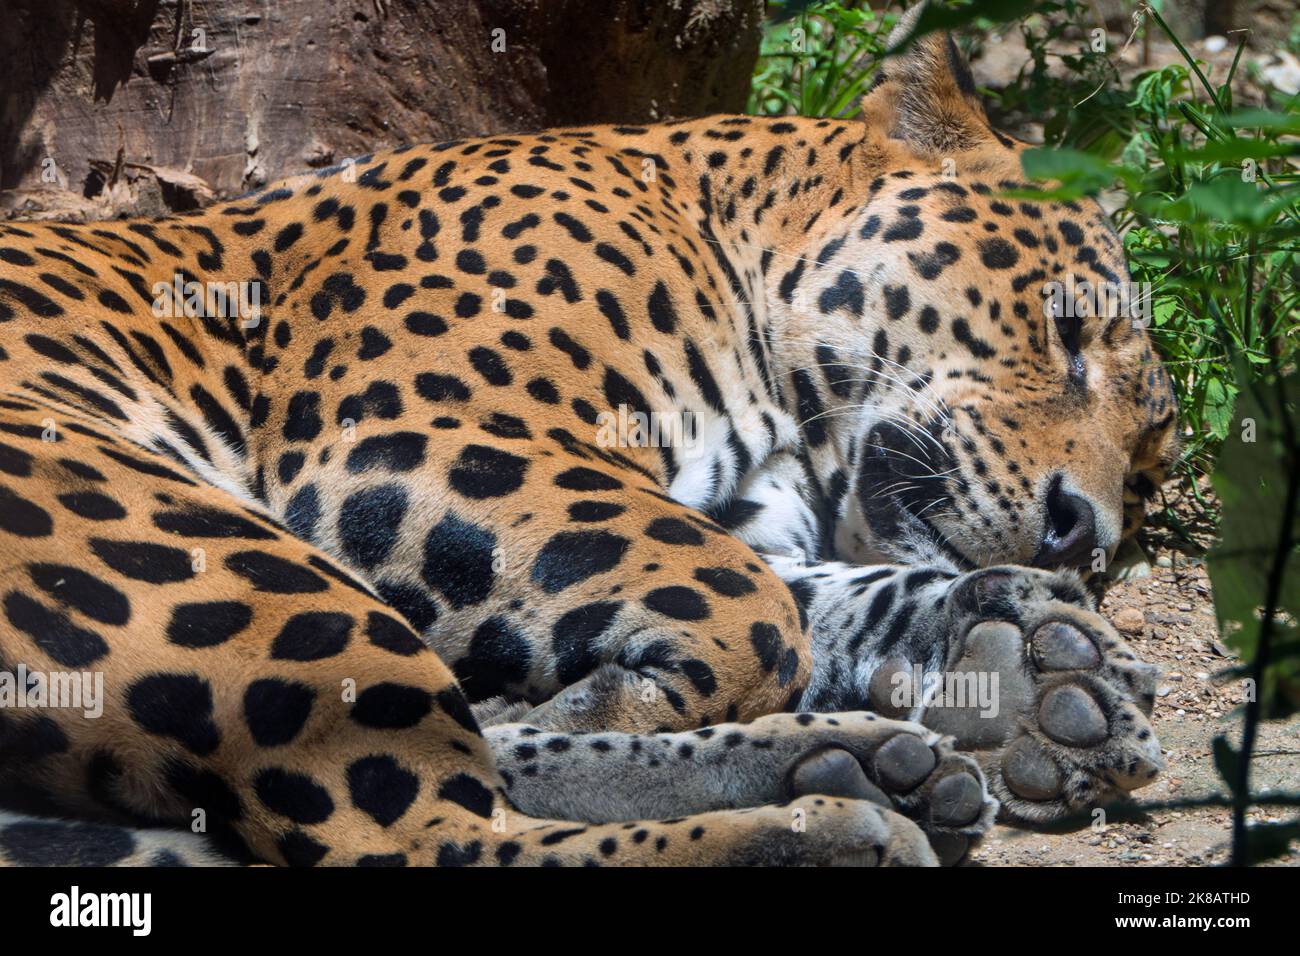 Large male jaguar in zoo cage in Chiapas, Mexico. Big cat (Panthera onca) taking a nap in enclosure Stock Photo